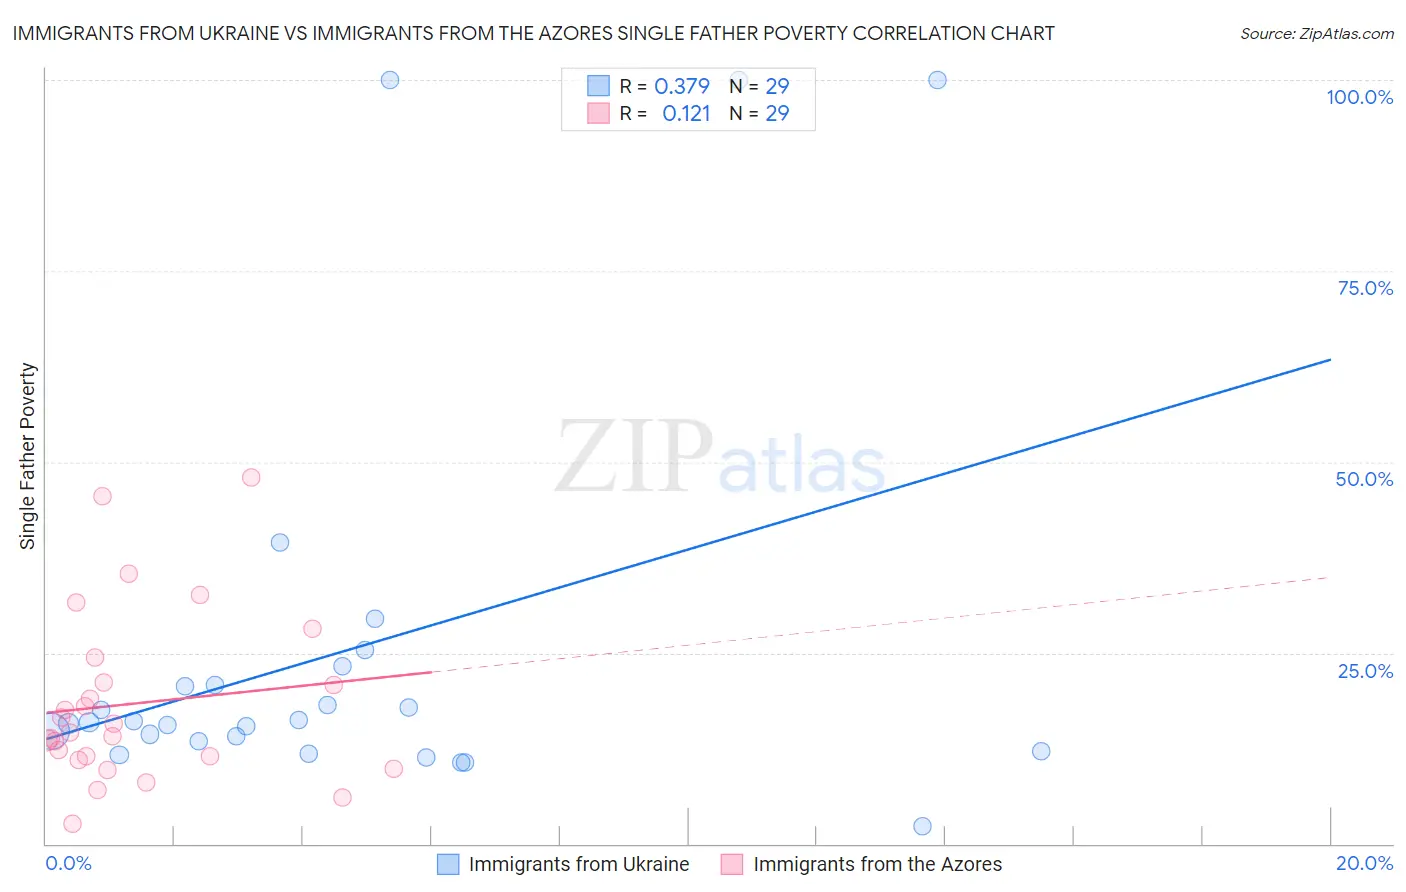 Immigrants from Ukraine vs Immigrants from the Azores Single Father Poverty